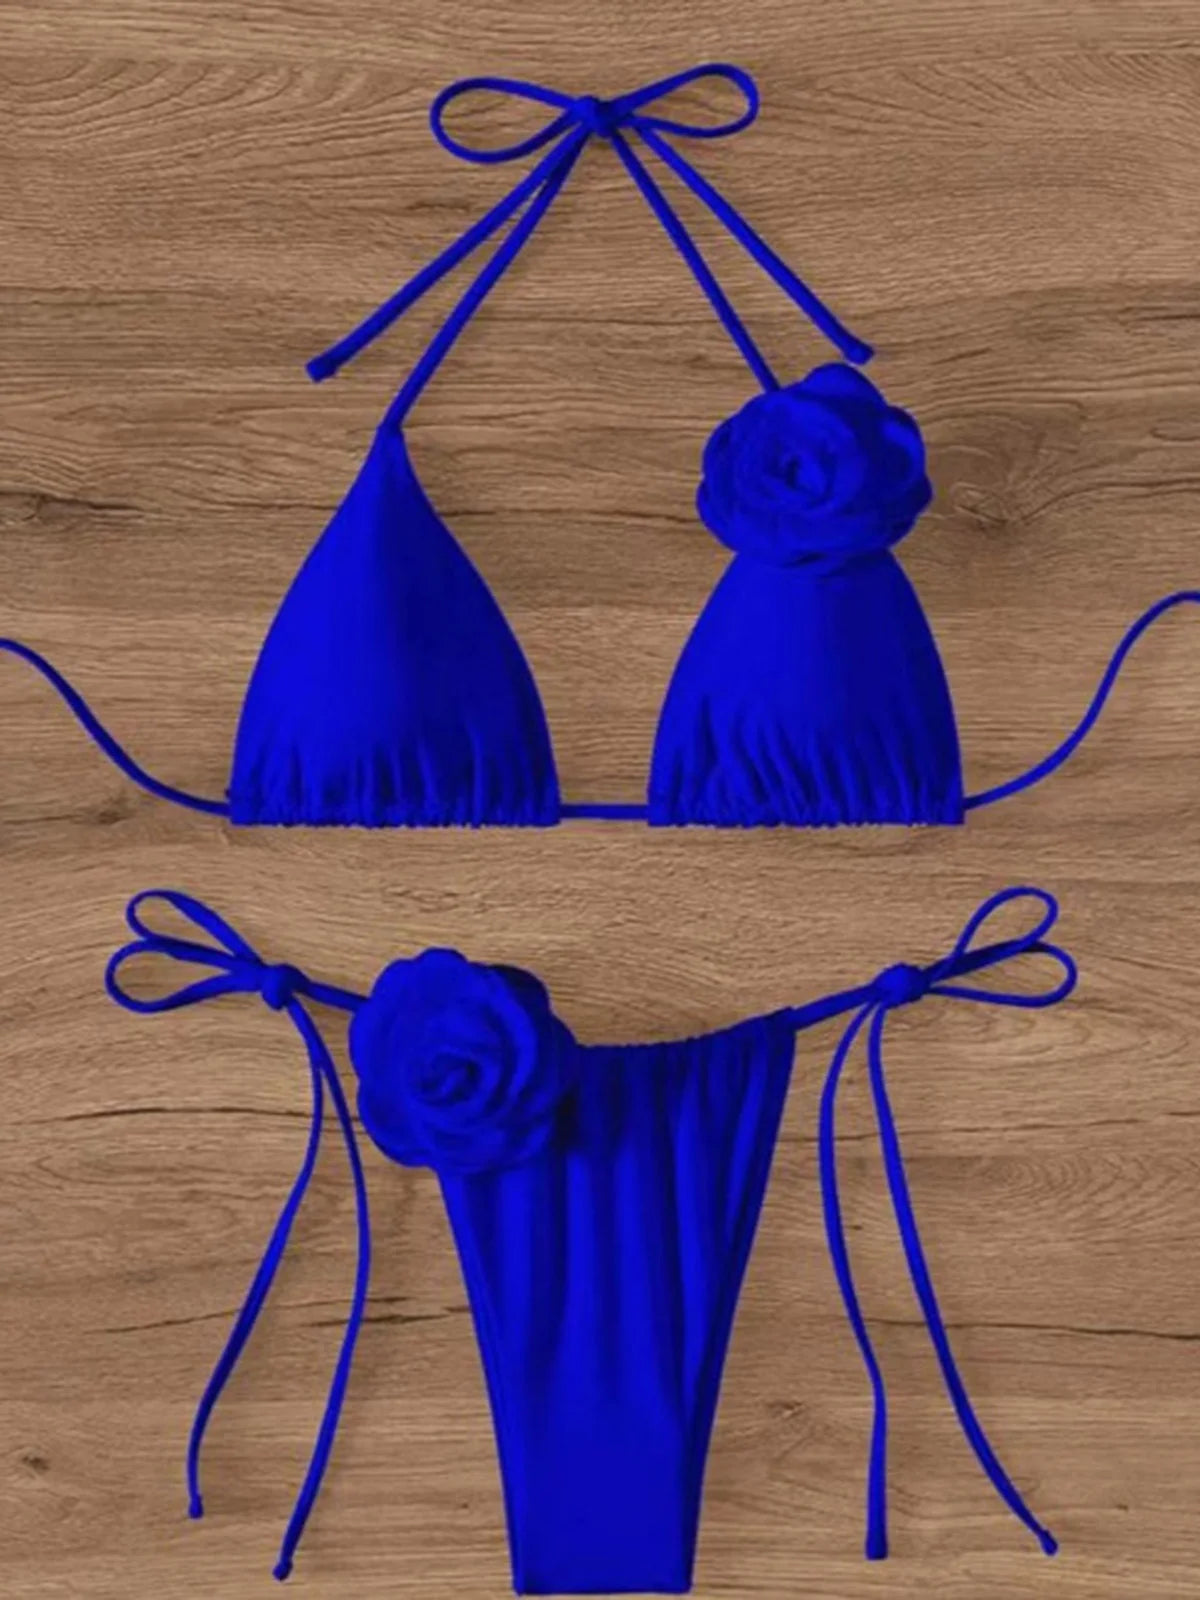 3D Flowers Halter Bikini Set in Blue, Black, Beige, and Red, Two Piece Swimwear Made From Nylon and Spandex, Available in Sizes S to XL, Fits True to Size, Features Wire Free Support, Low Waist, and Includes Pad, Perfect for Women aged 18-35 and Adults, In Stock with Free Shipping